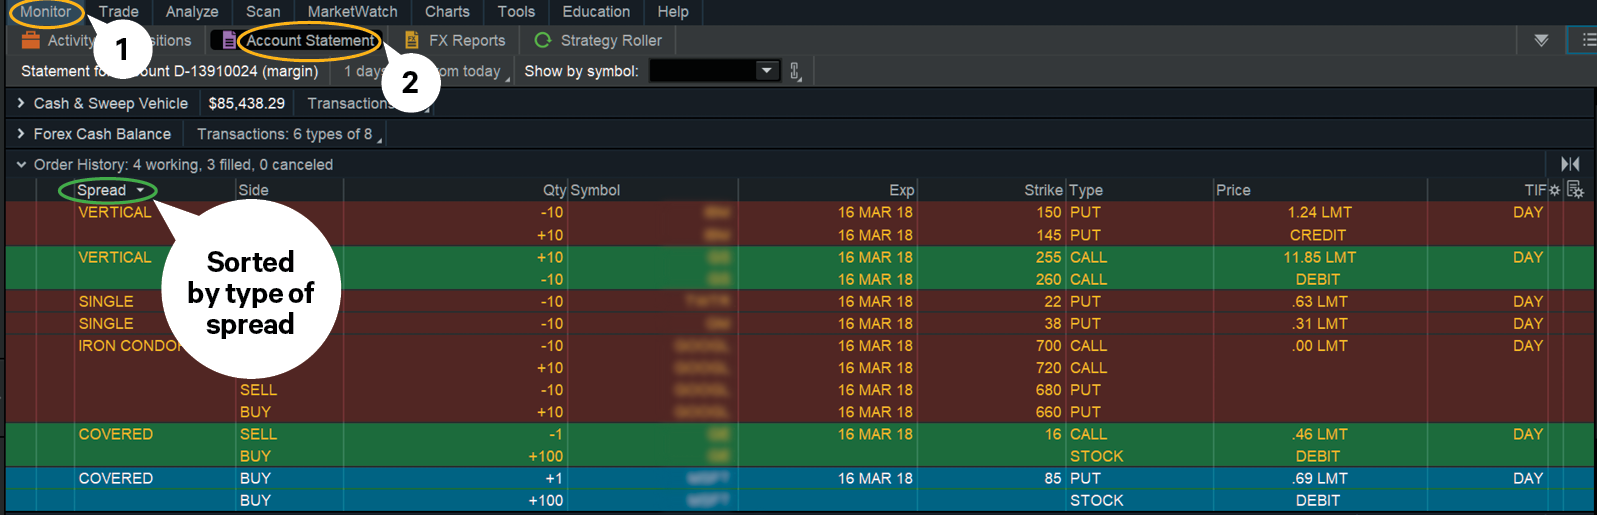 Commodity Trade Risk Management Software Strategy Roller Thinkorswim